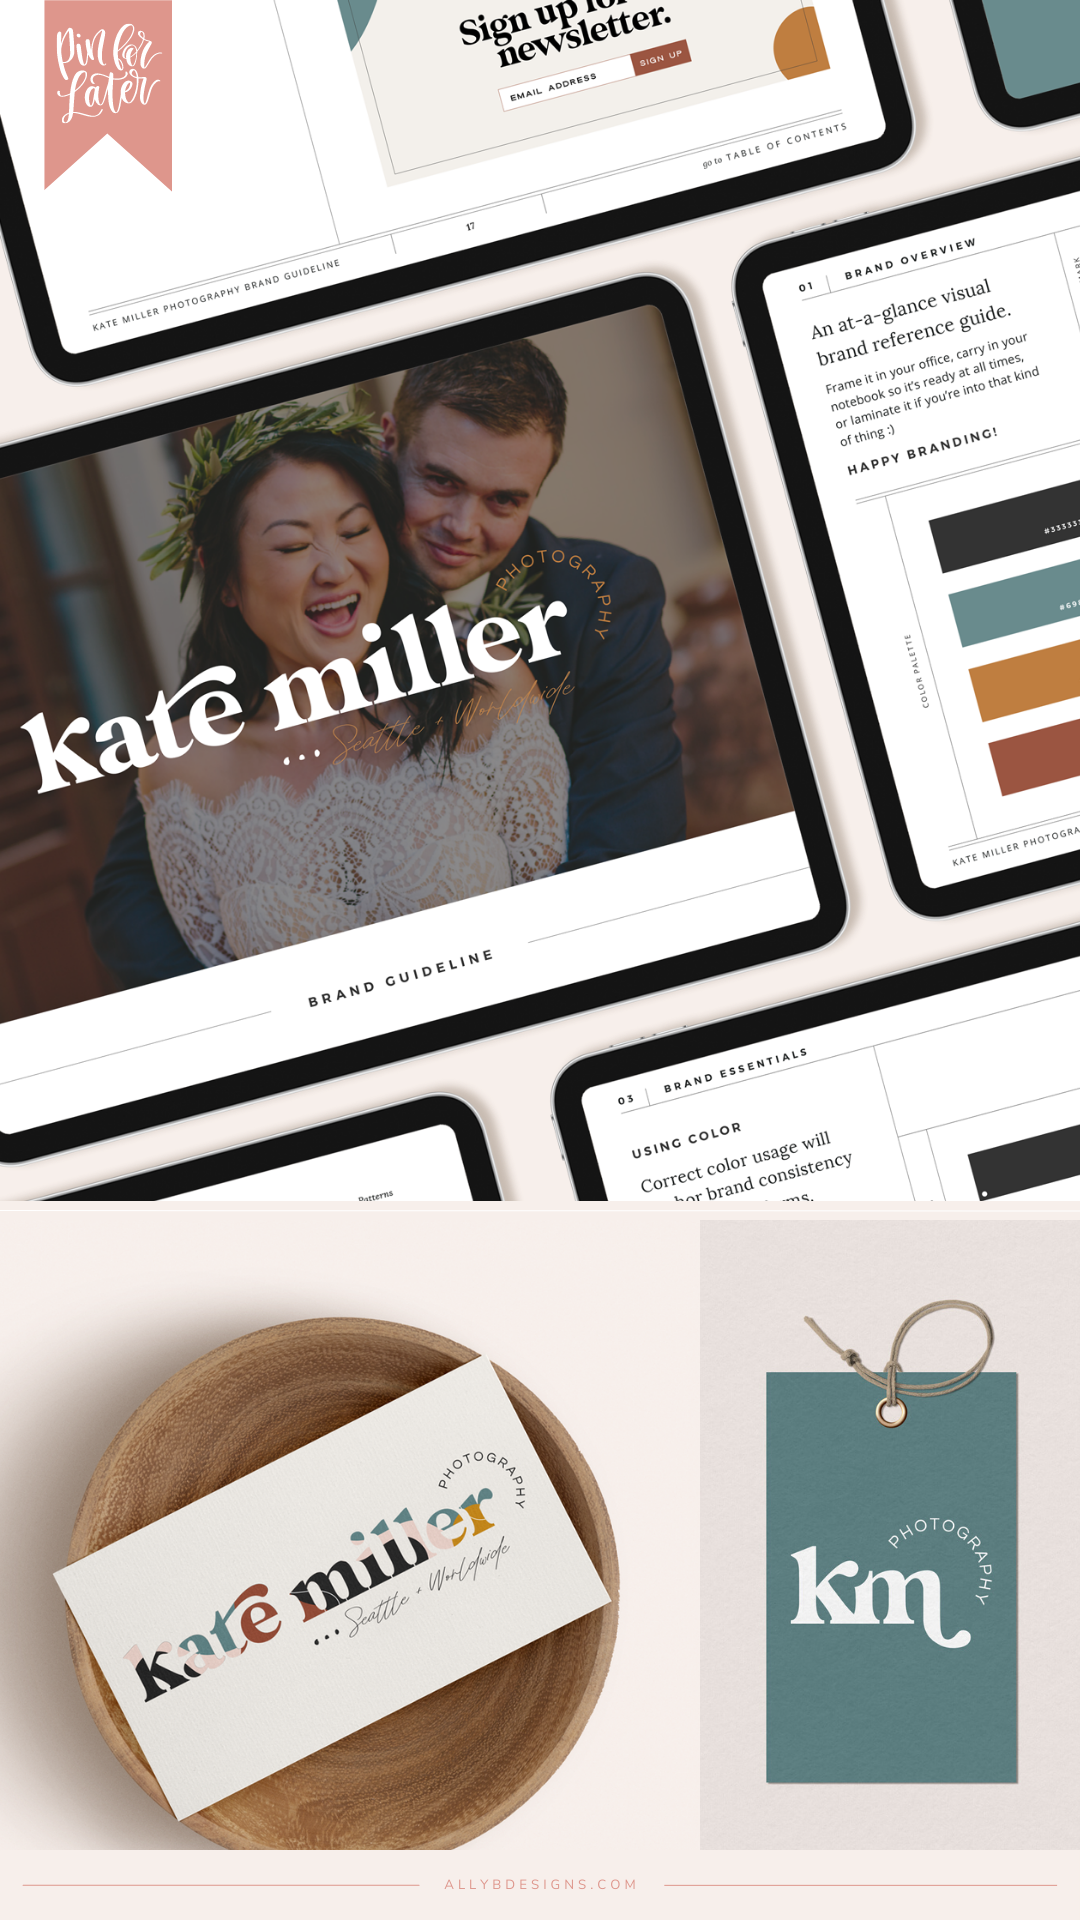 Client Launch: A Colorful Wedding Photographer Website and Brand for Kate Miller Photography by Ally B Designs